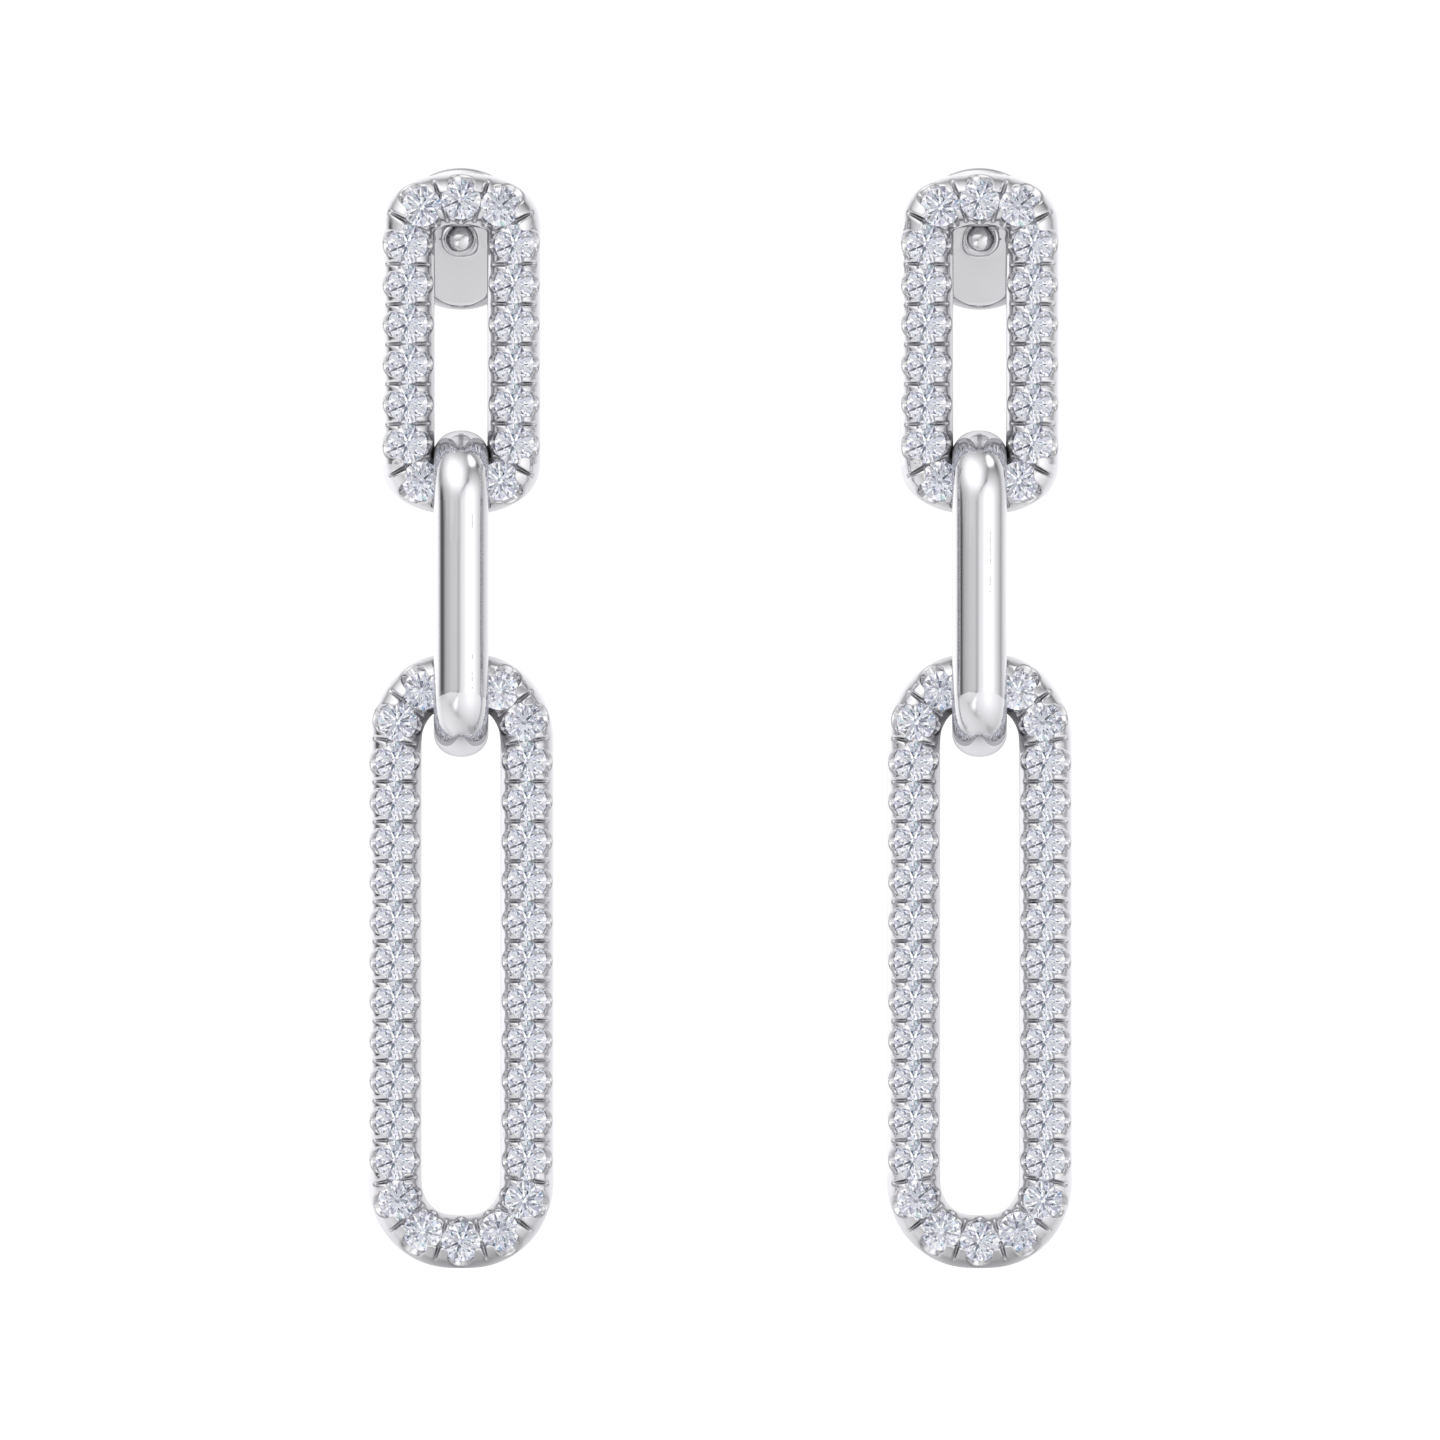 Diamond chain link earrings in white gold with white diamonds of 0.40 ct in weight